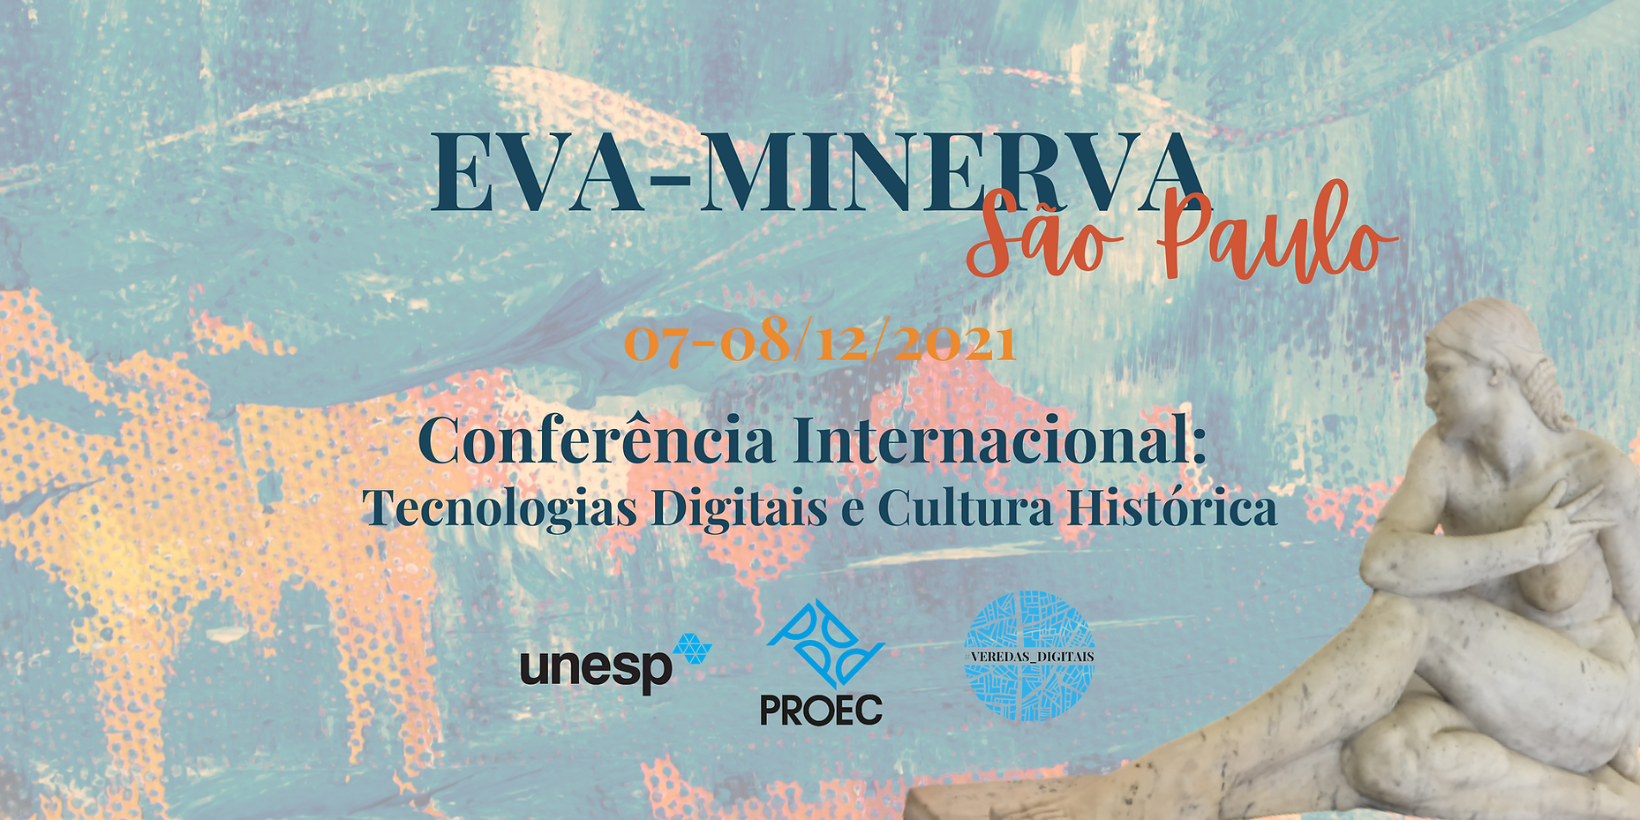 EVA International Conference on Digital Technologies and Historical Culture